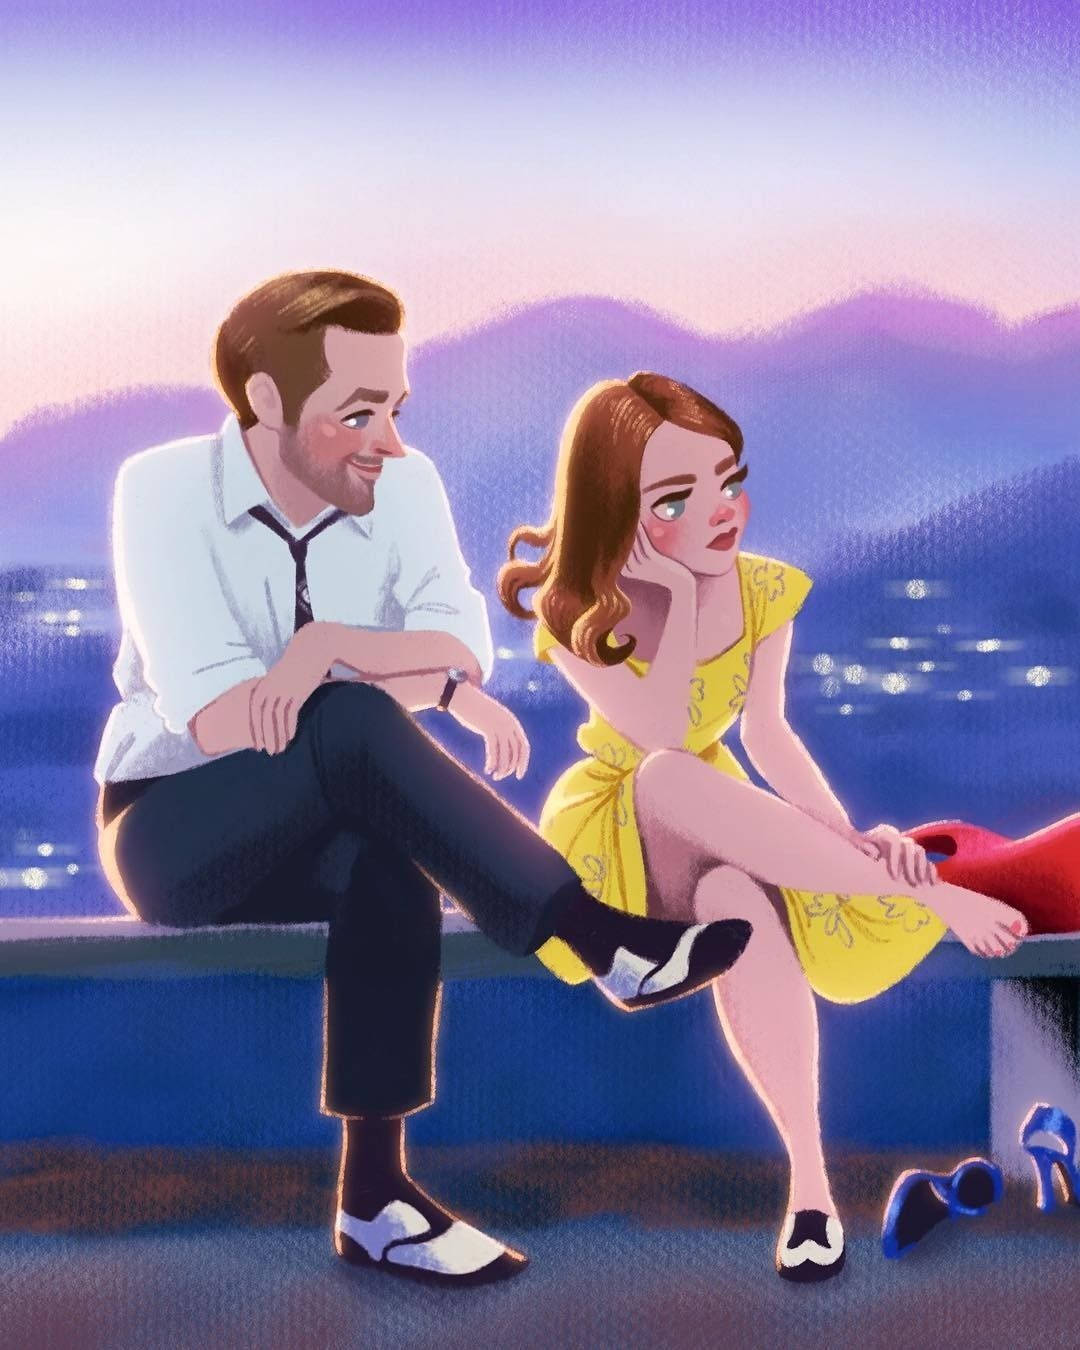 Cute Cartoon Couple Sitting Together Background